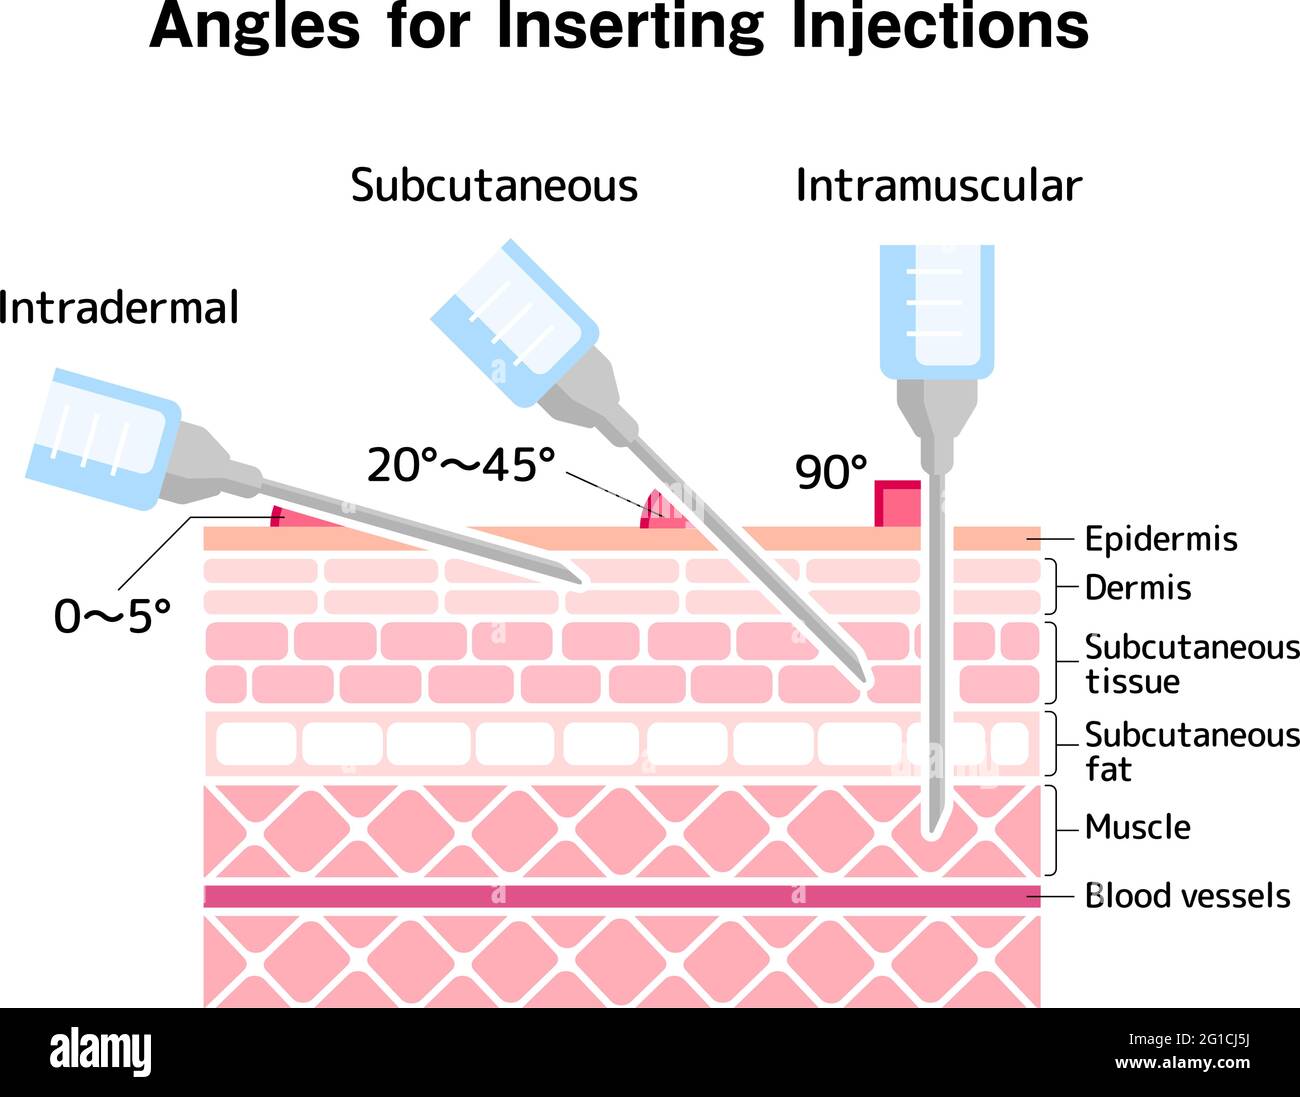 Angles for Inserting Injections vector illustration Stock Vector